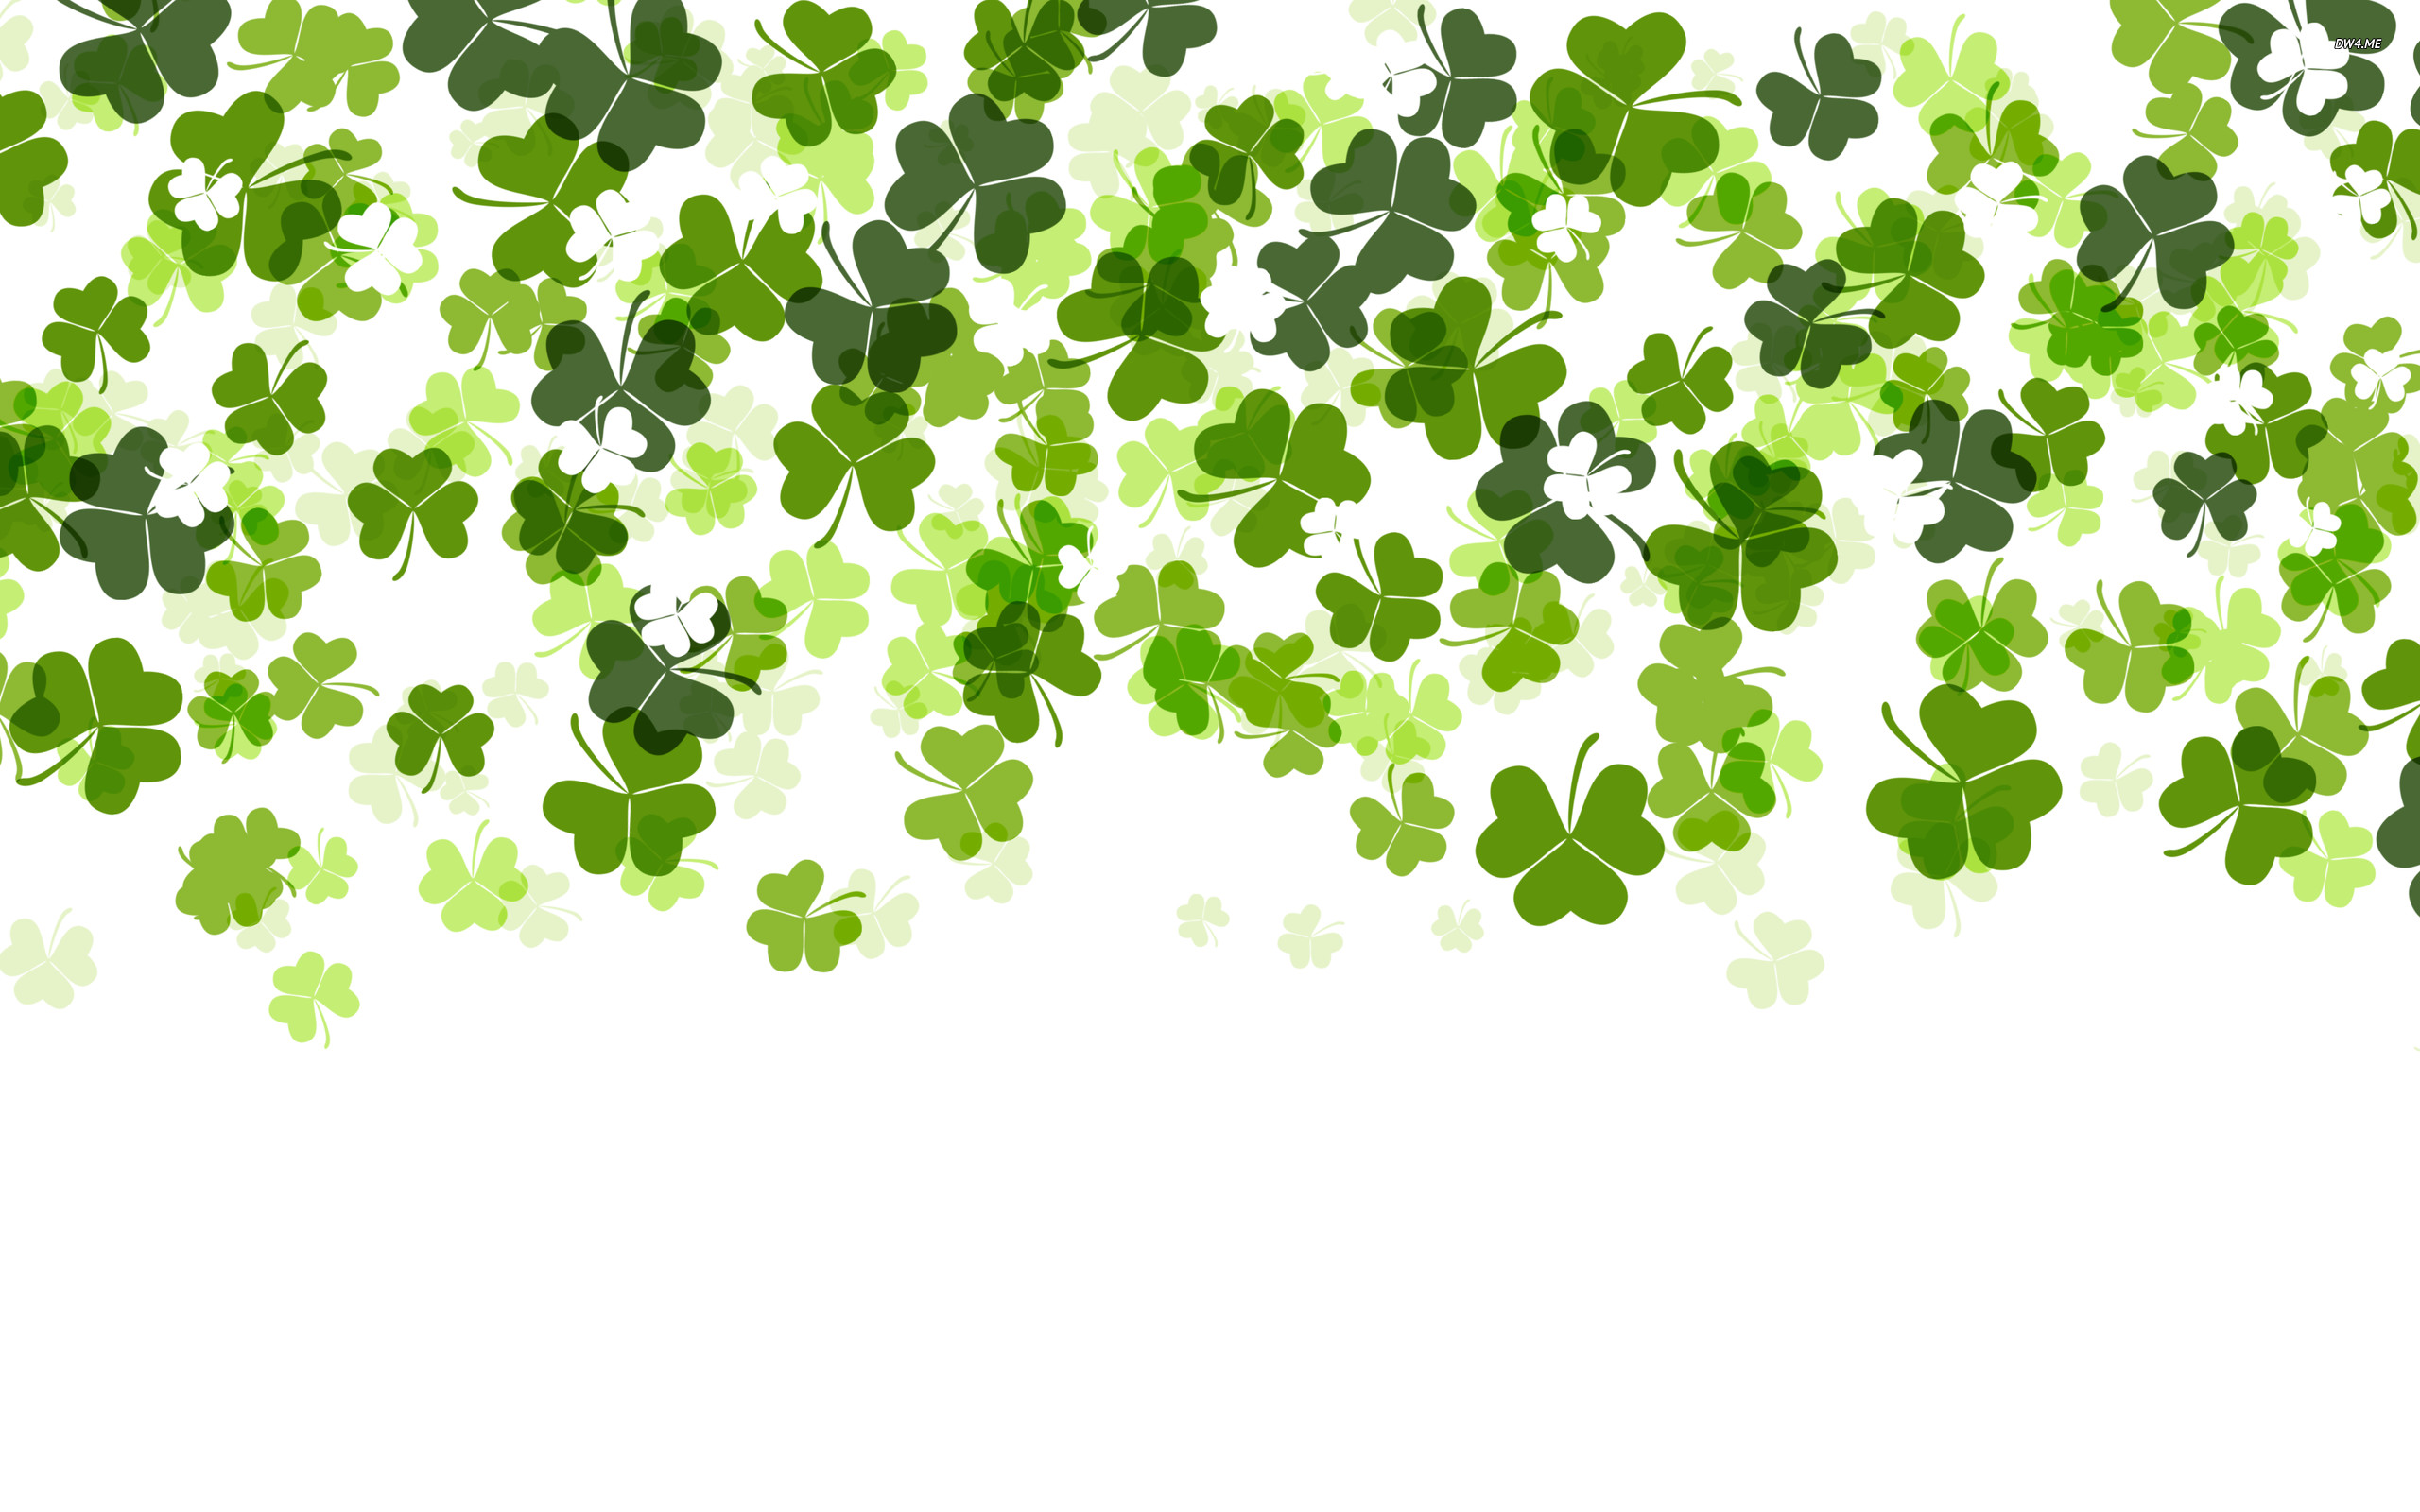 2560x1600 shamrocks pic to download (Sinjin Chester 2560 x 1600)